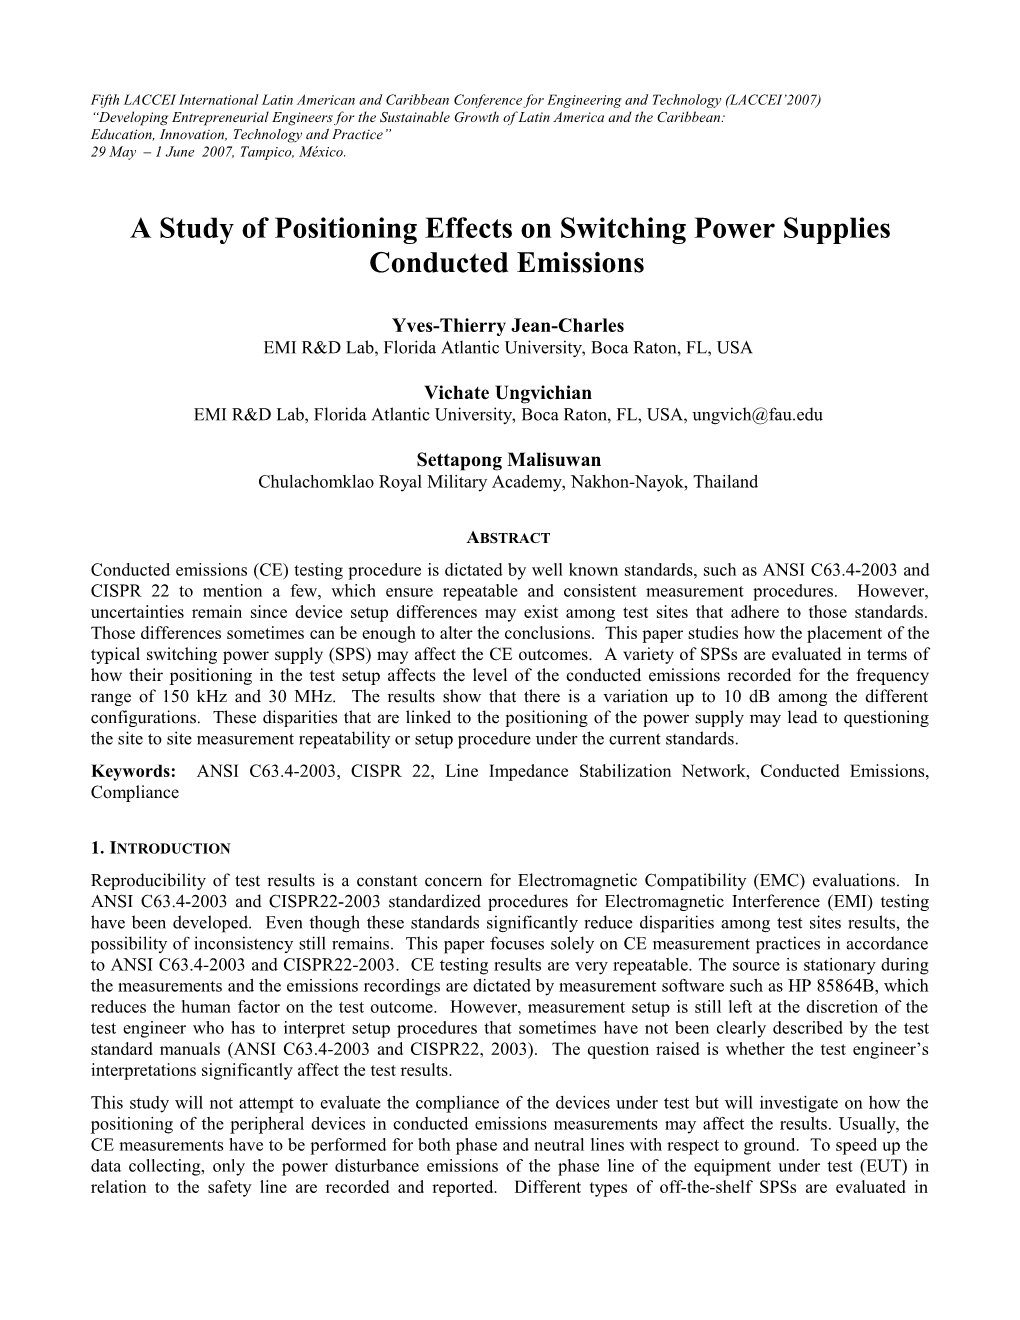 Study of the Effects of Position on Switching Power Supplies Conducted Emissions